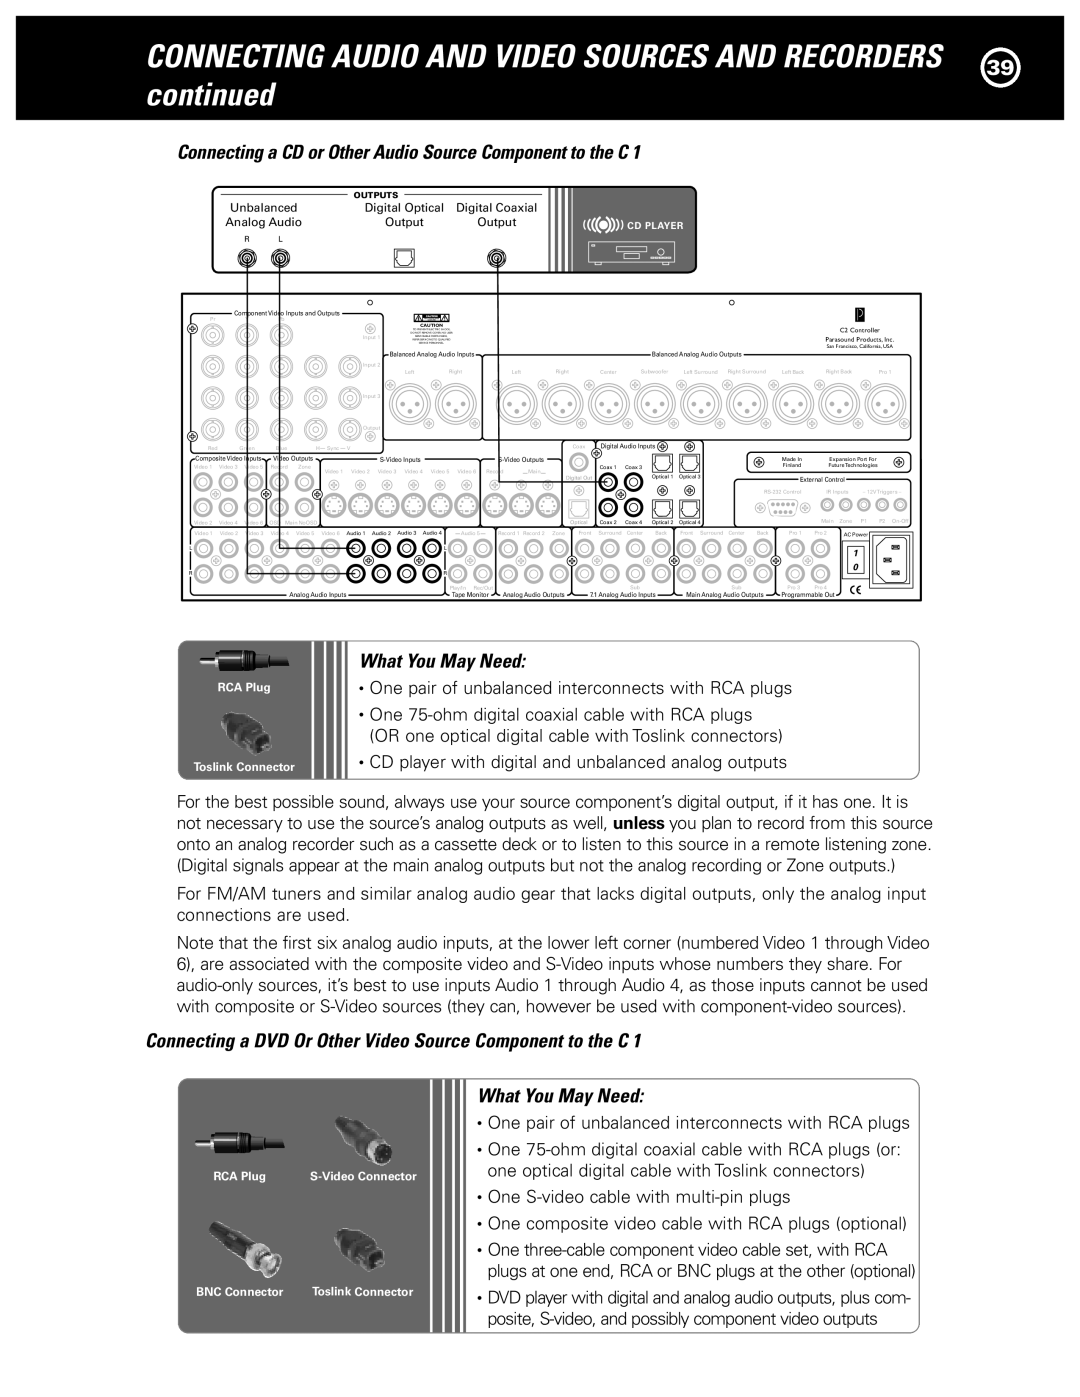 Parasound Halo C1 Controller manual What You May Need 